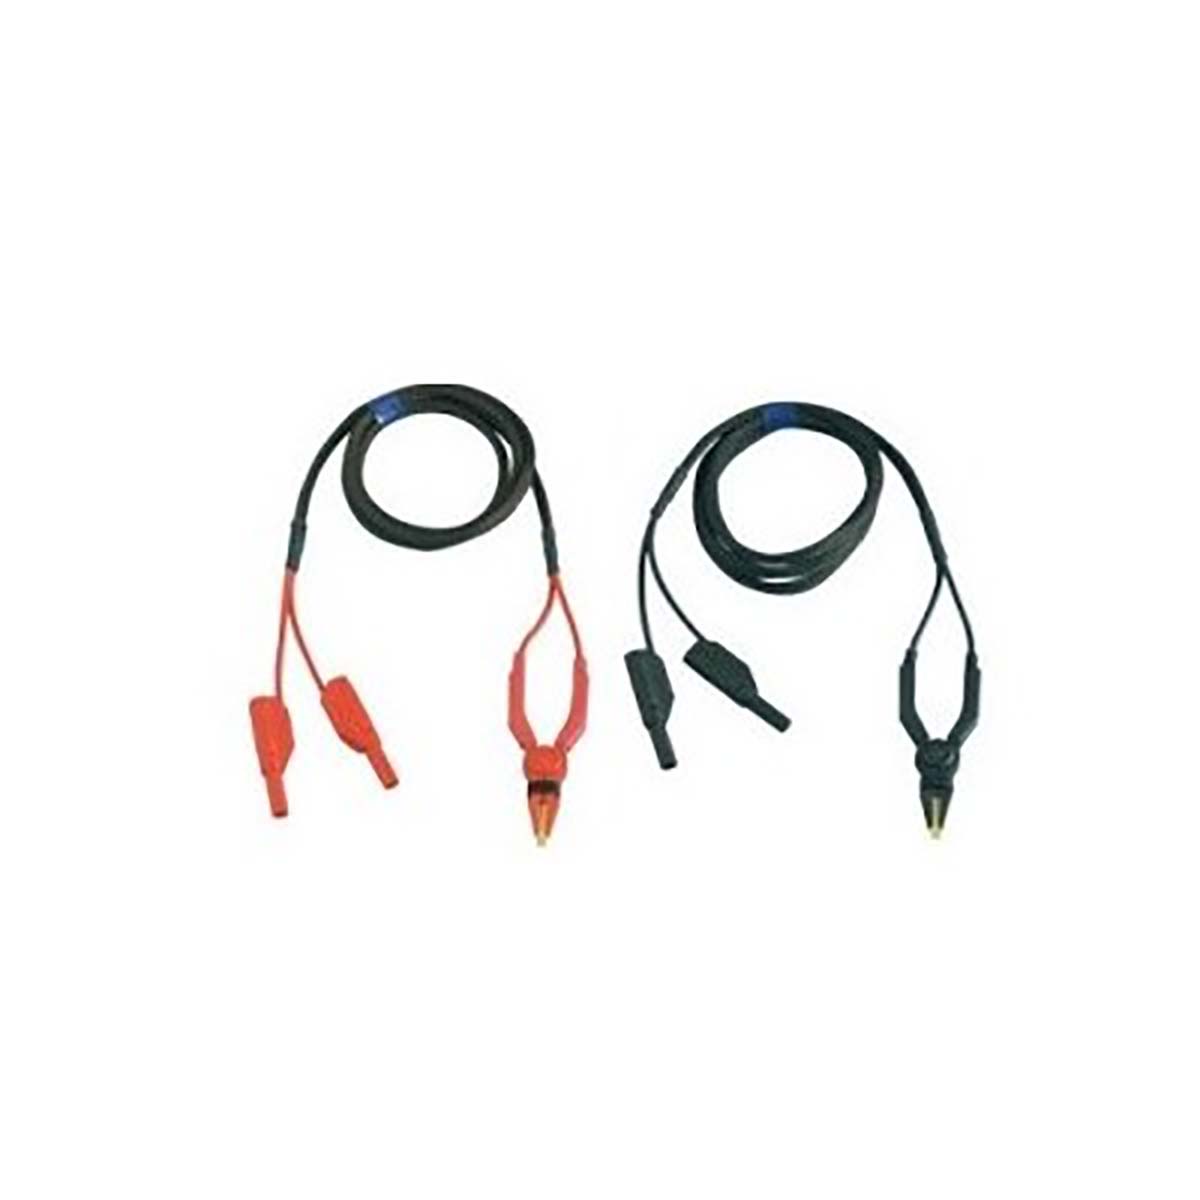 Aoip Instrumentation Multimeter Leads for Use with OM 21